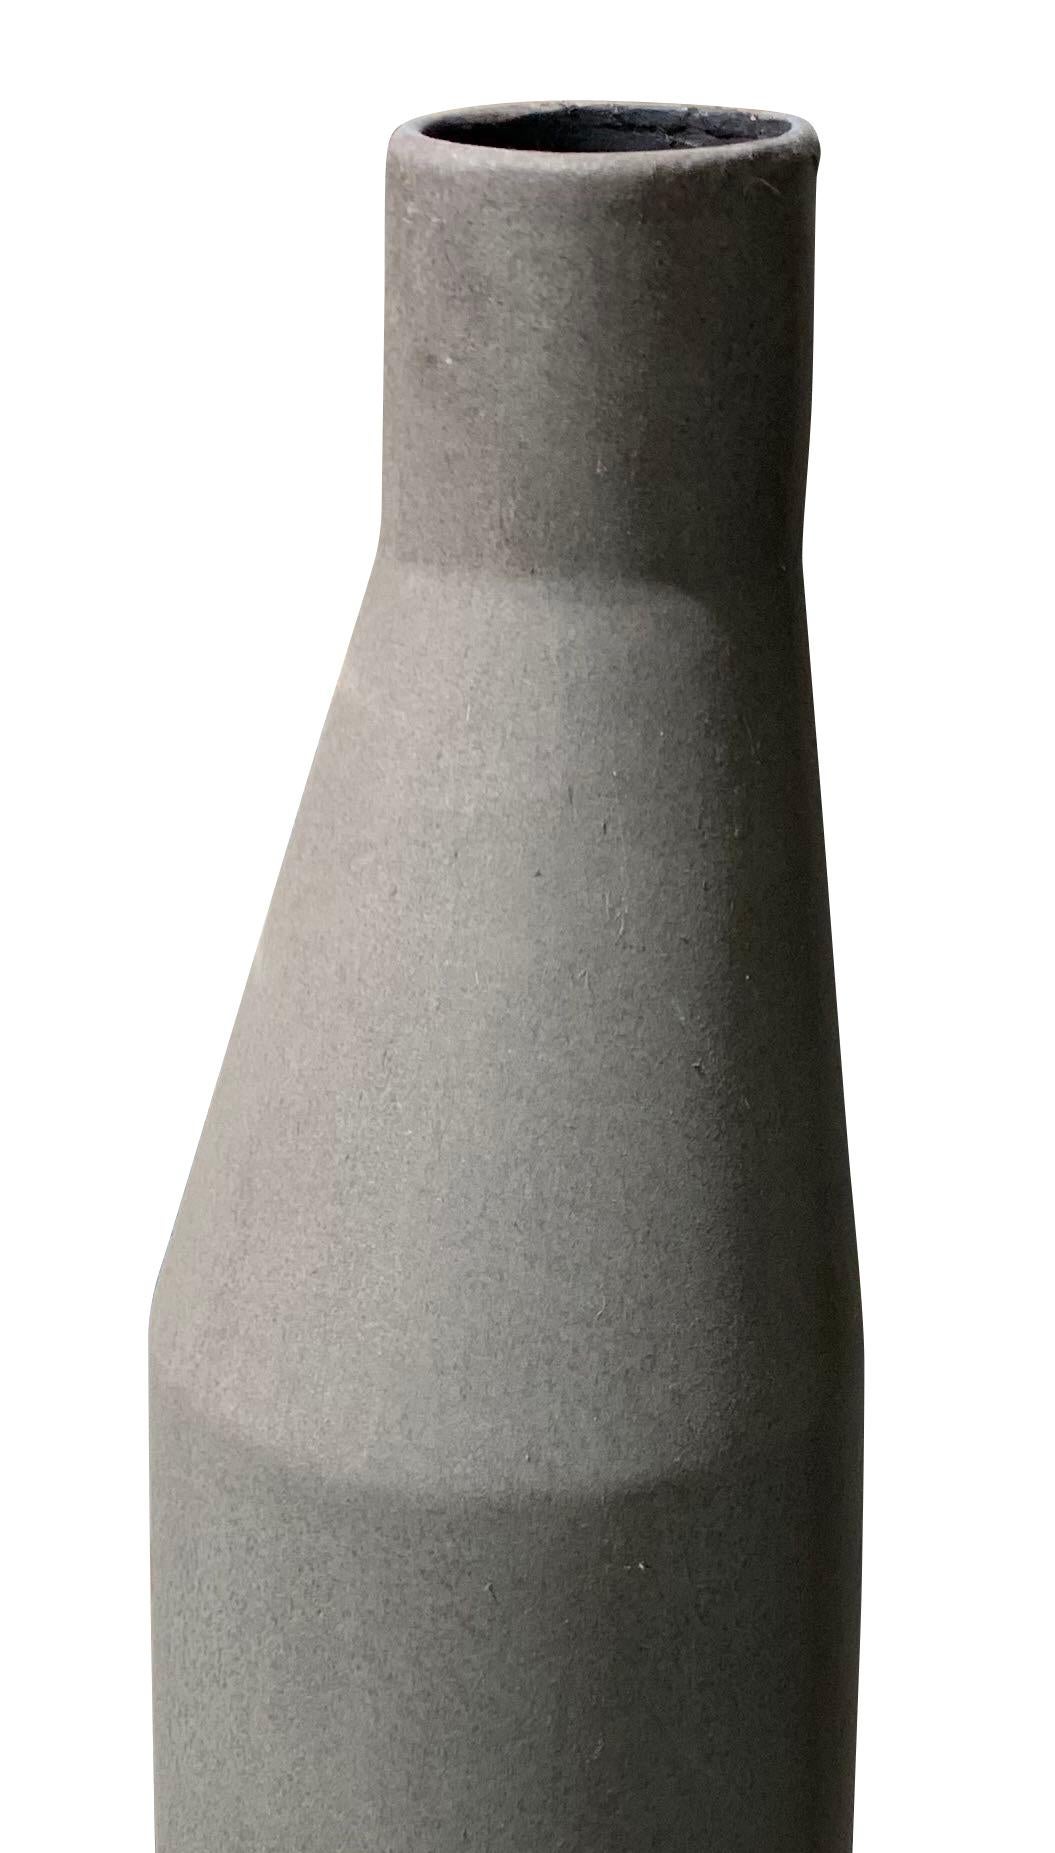 Contemporary Danish design tall vase with curved top
Matte grey glaze
One of a collection of many shapes and sizes.